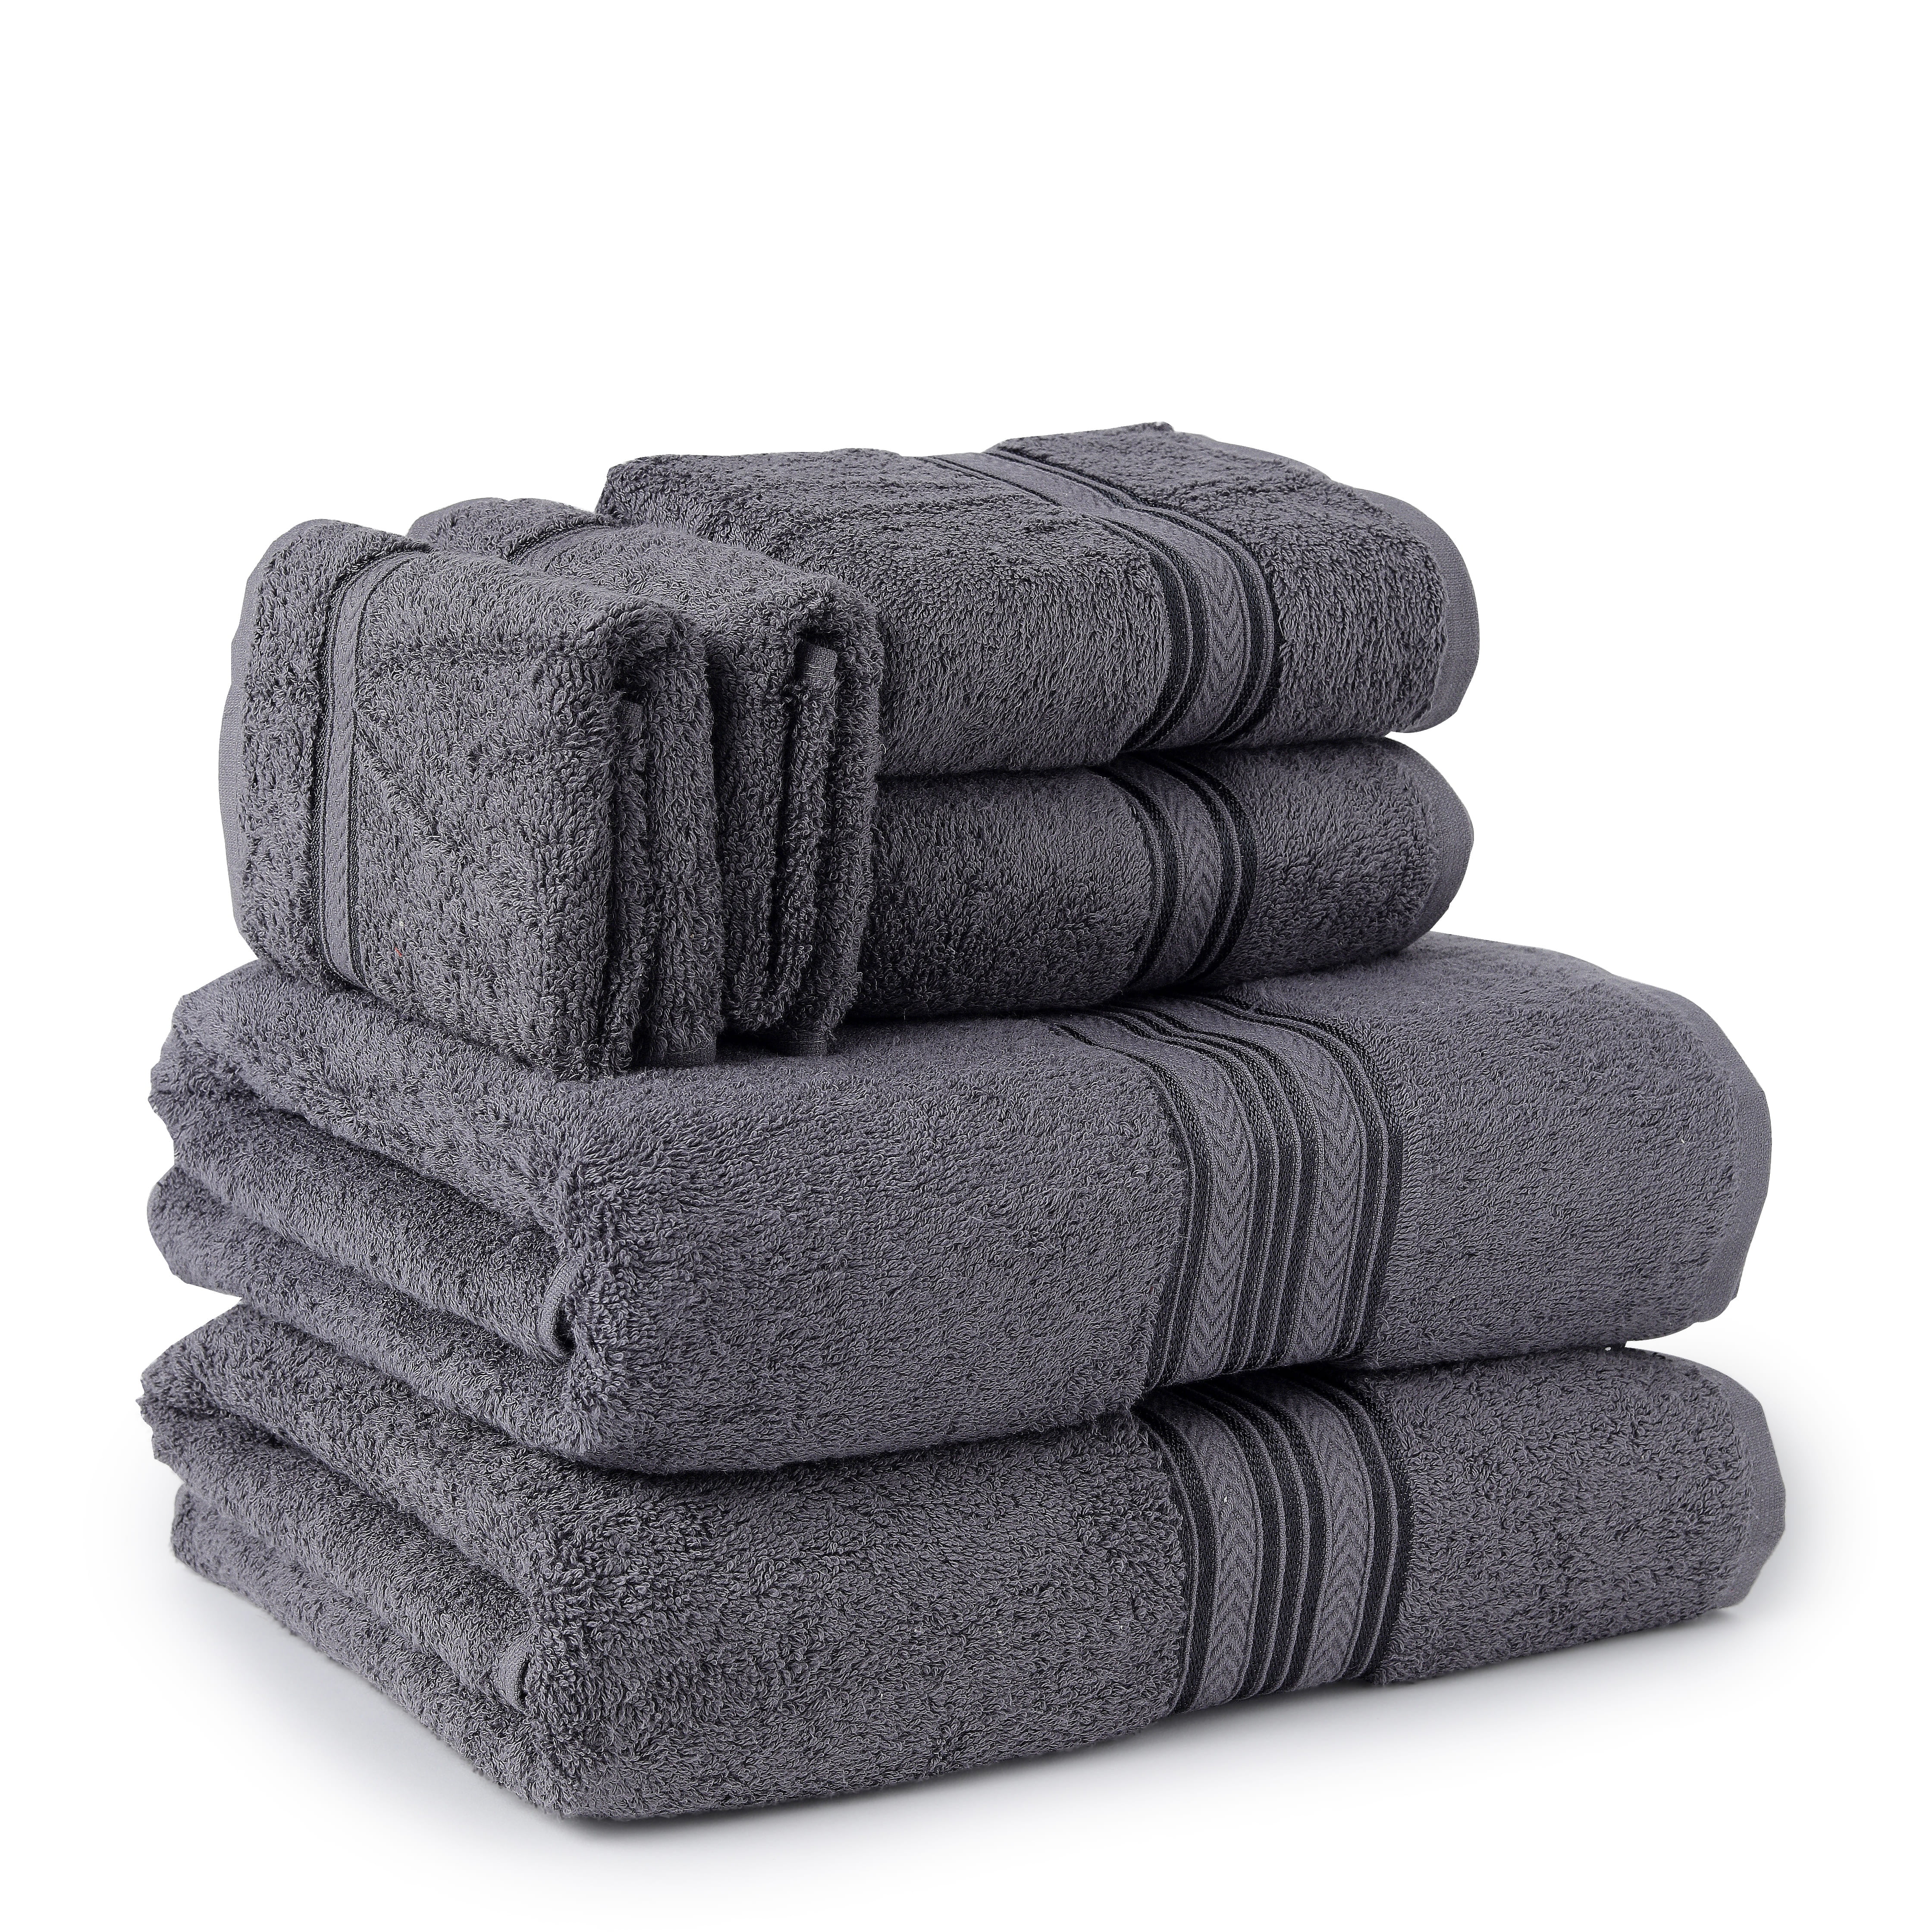 Elvana Home Ultra Soft 6 Pack Cotton Towel Set Contains 2 Bath Towels 28x55 inch 2 Hand Towels 16x24 inch & 2 Wash Coths 12x12 inch Ideal for Ever